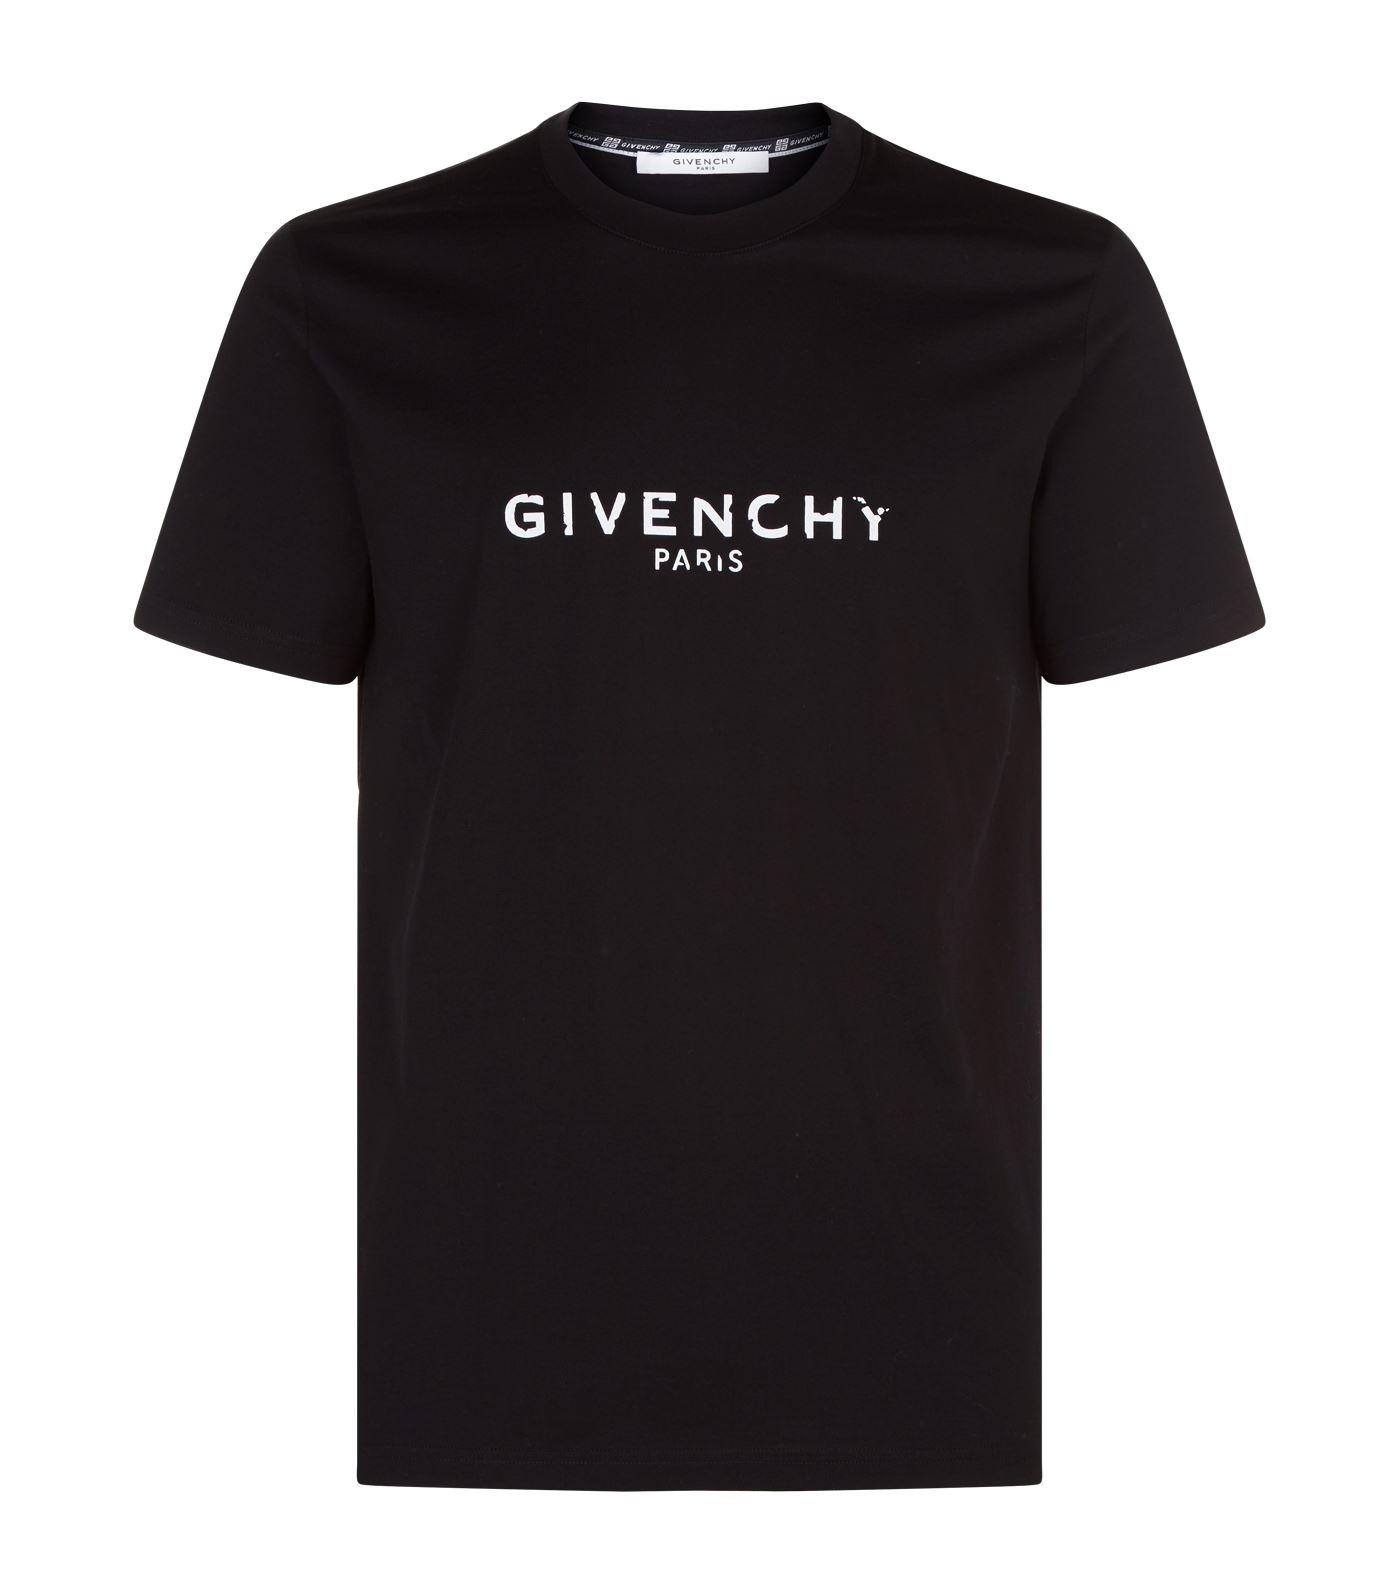 Givenchy Cotton Contrast Logo T-shirt in Black for Men - Save 11% - Lyst